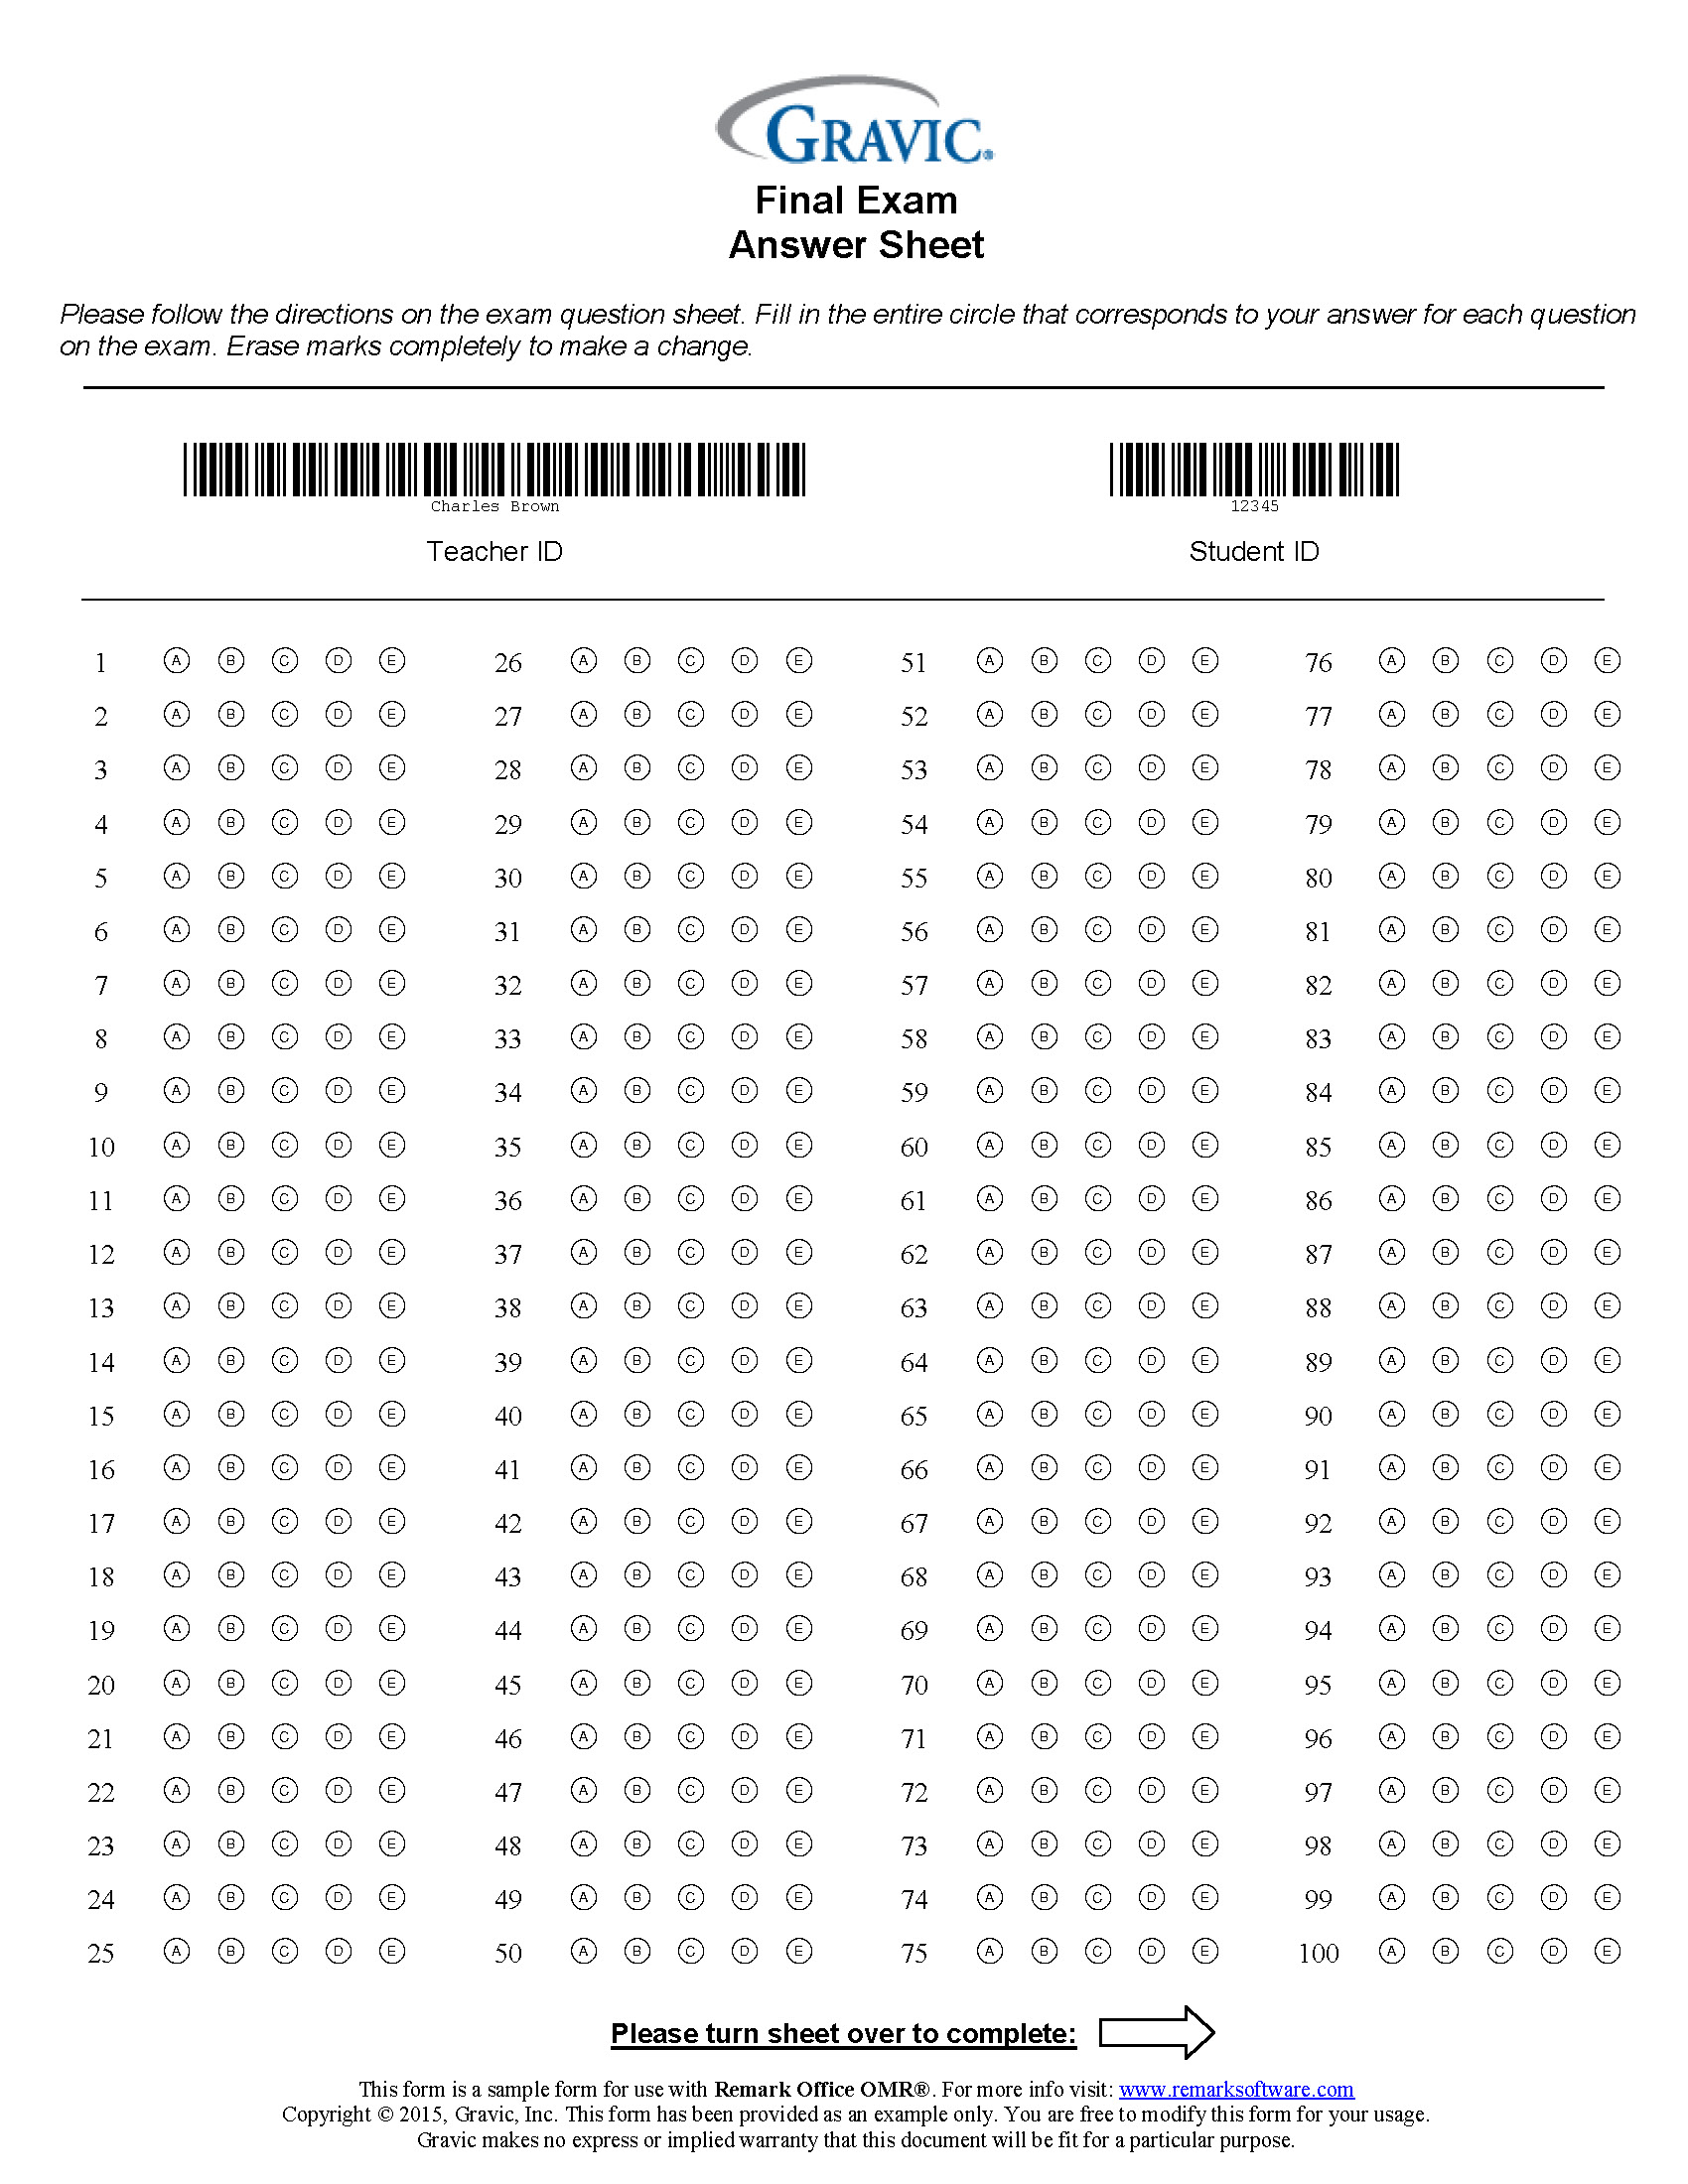 200-question-answer-sheet-with-extra-credit-and-barcode-remark-software